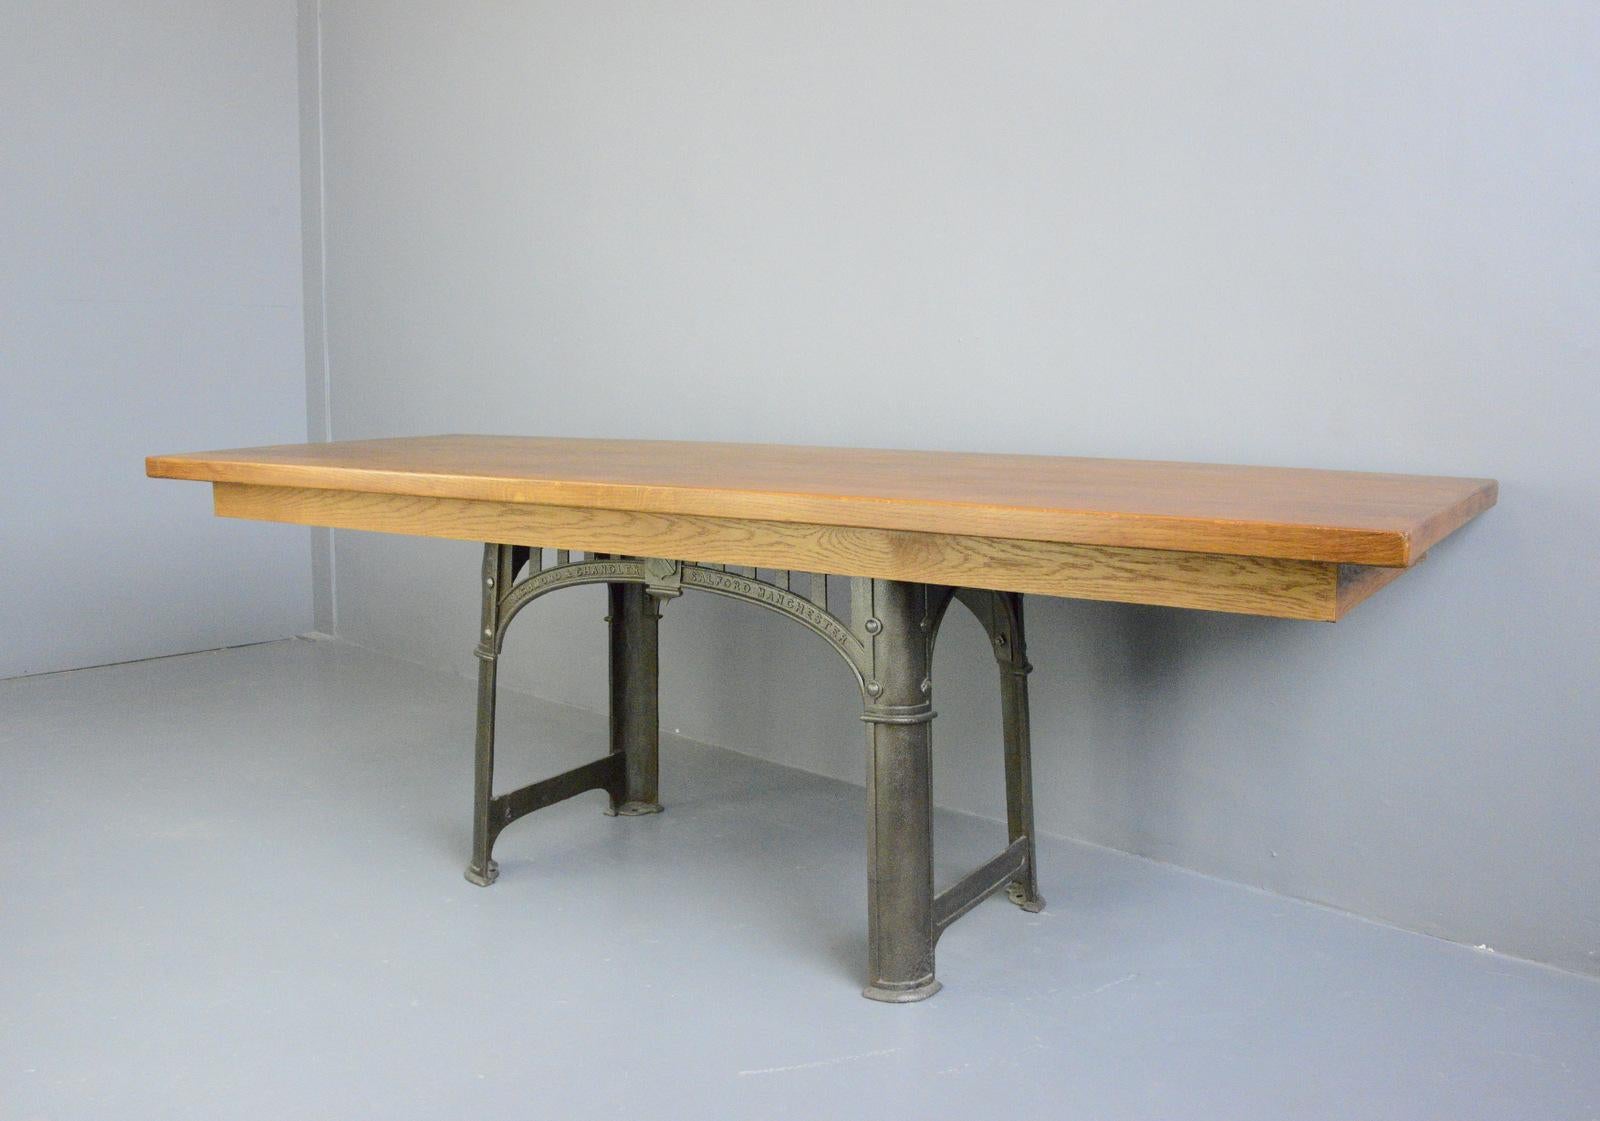 Iron Large Industrial Table by Richmond & Chandler, Circa 1910